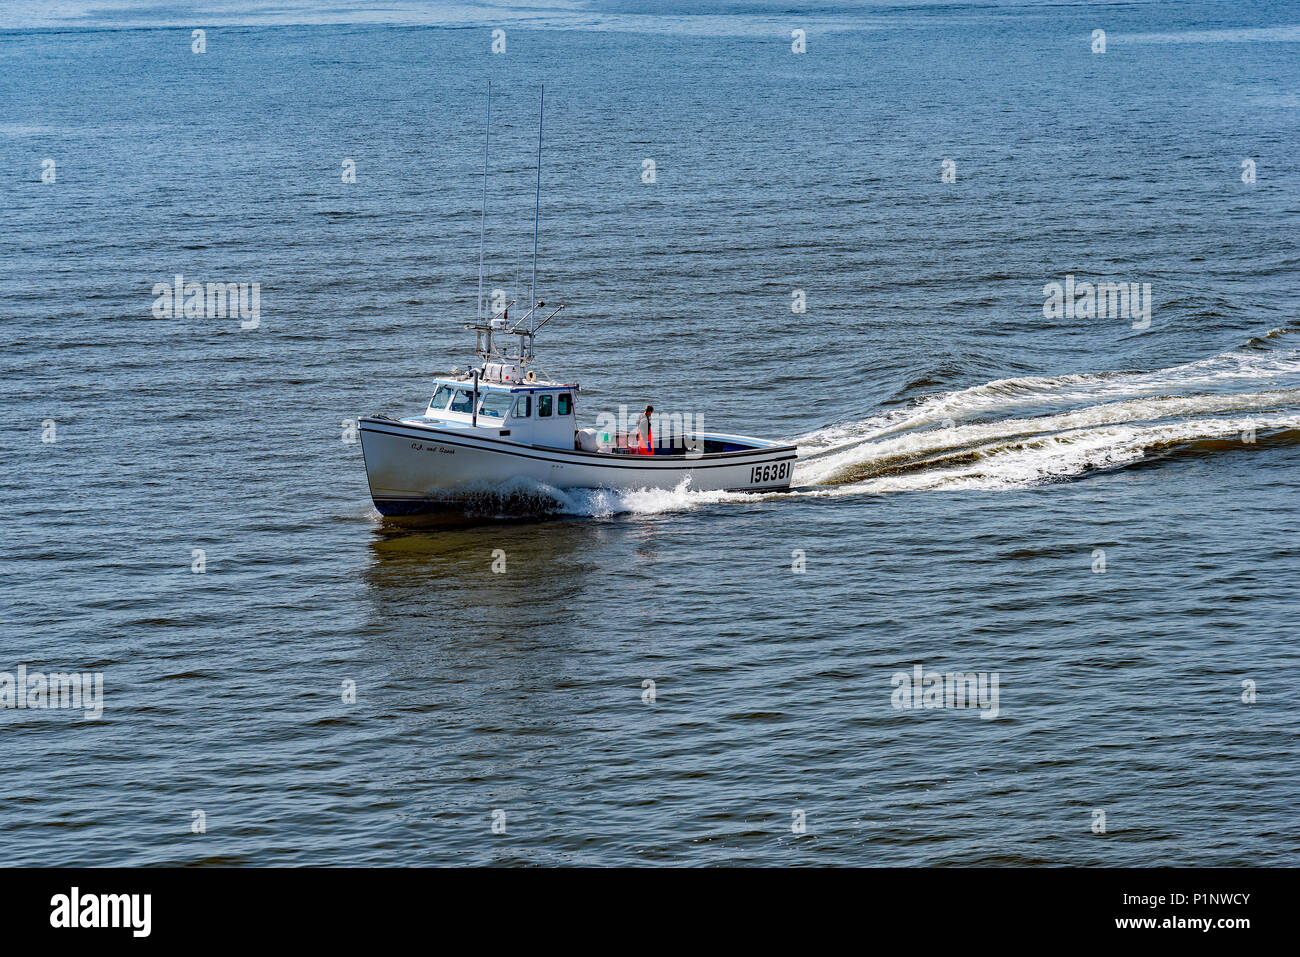 Lobster boat coming out of Caribou, Nova Scotia, Canada. Photo taken from the Woods Island, P.E.I. to Caribou, N.S. Ferry. Stock Photo